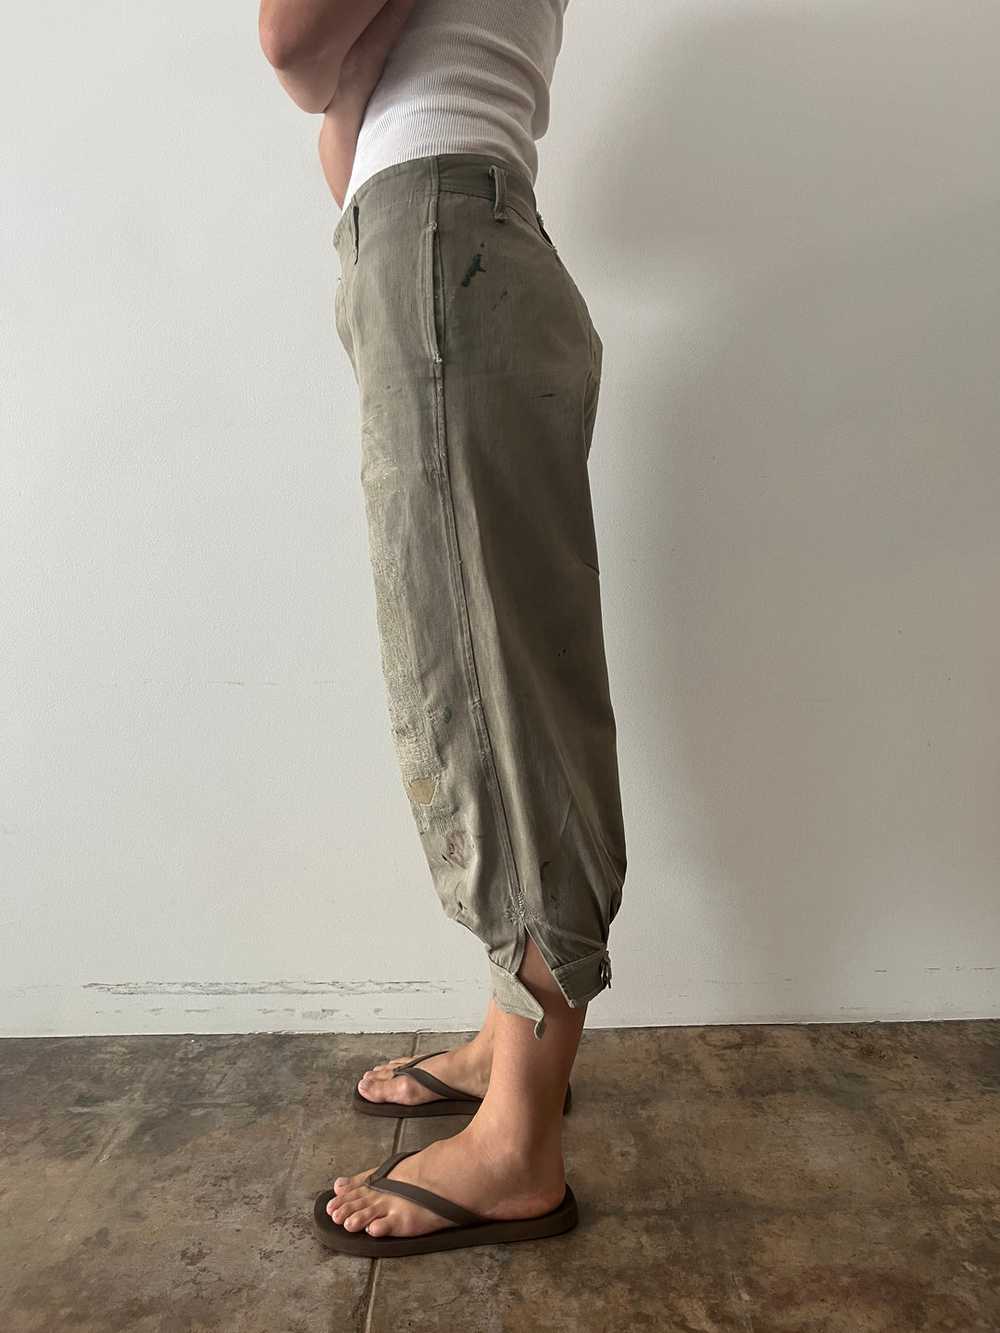 40s/50s Japanese Cotton Twill Work Pants - image 3